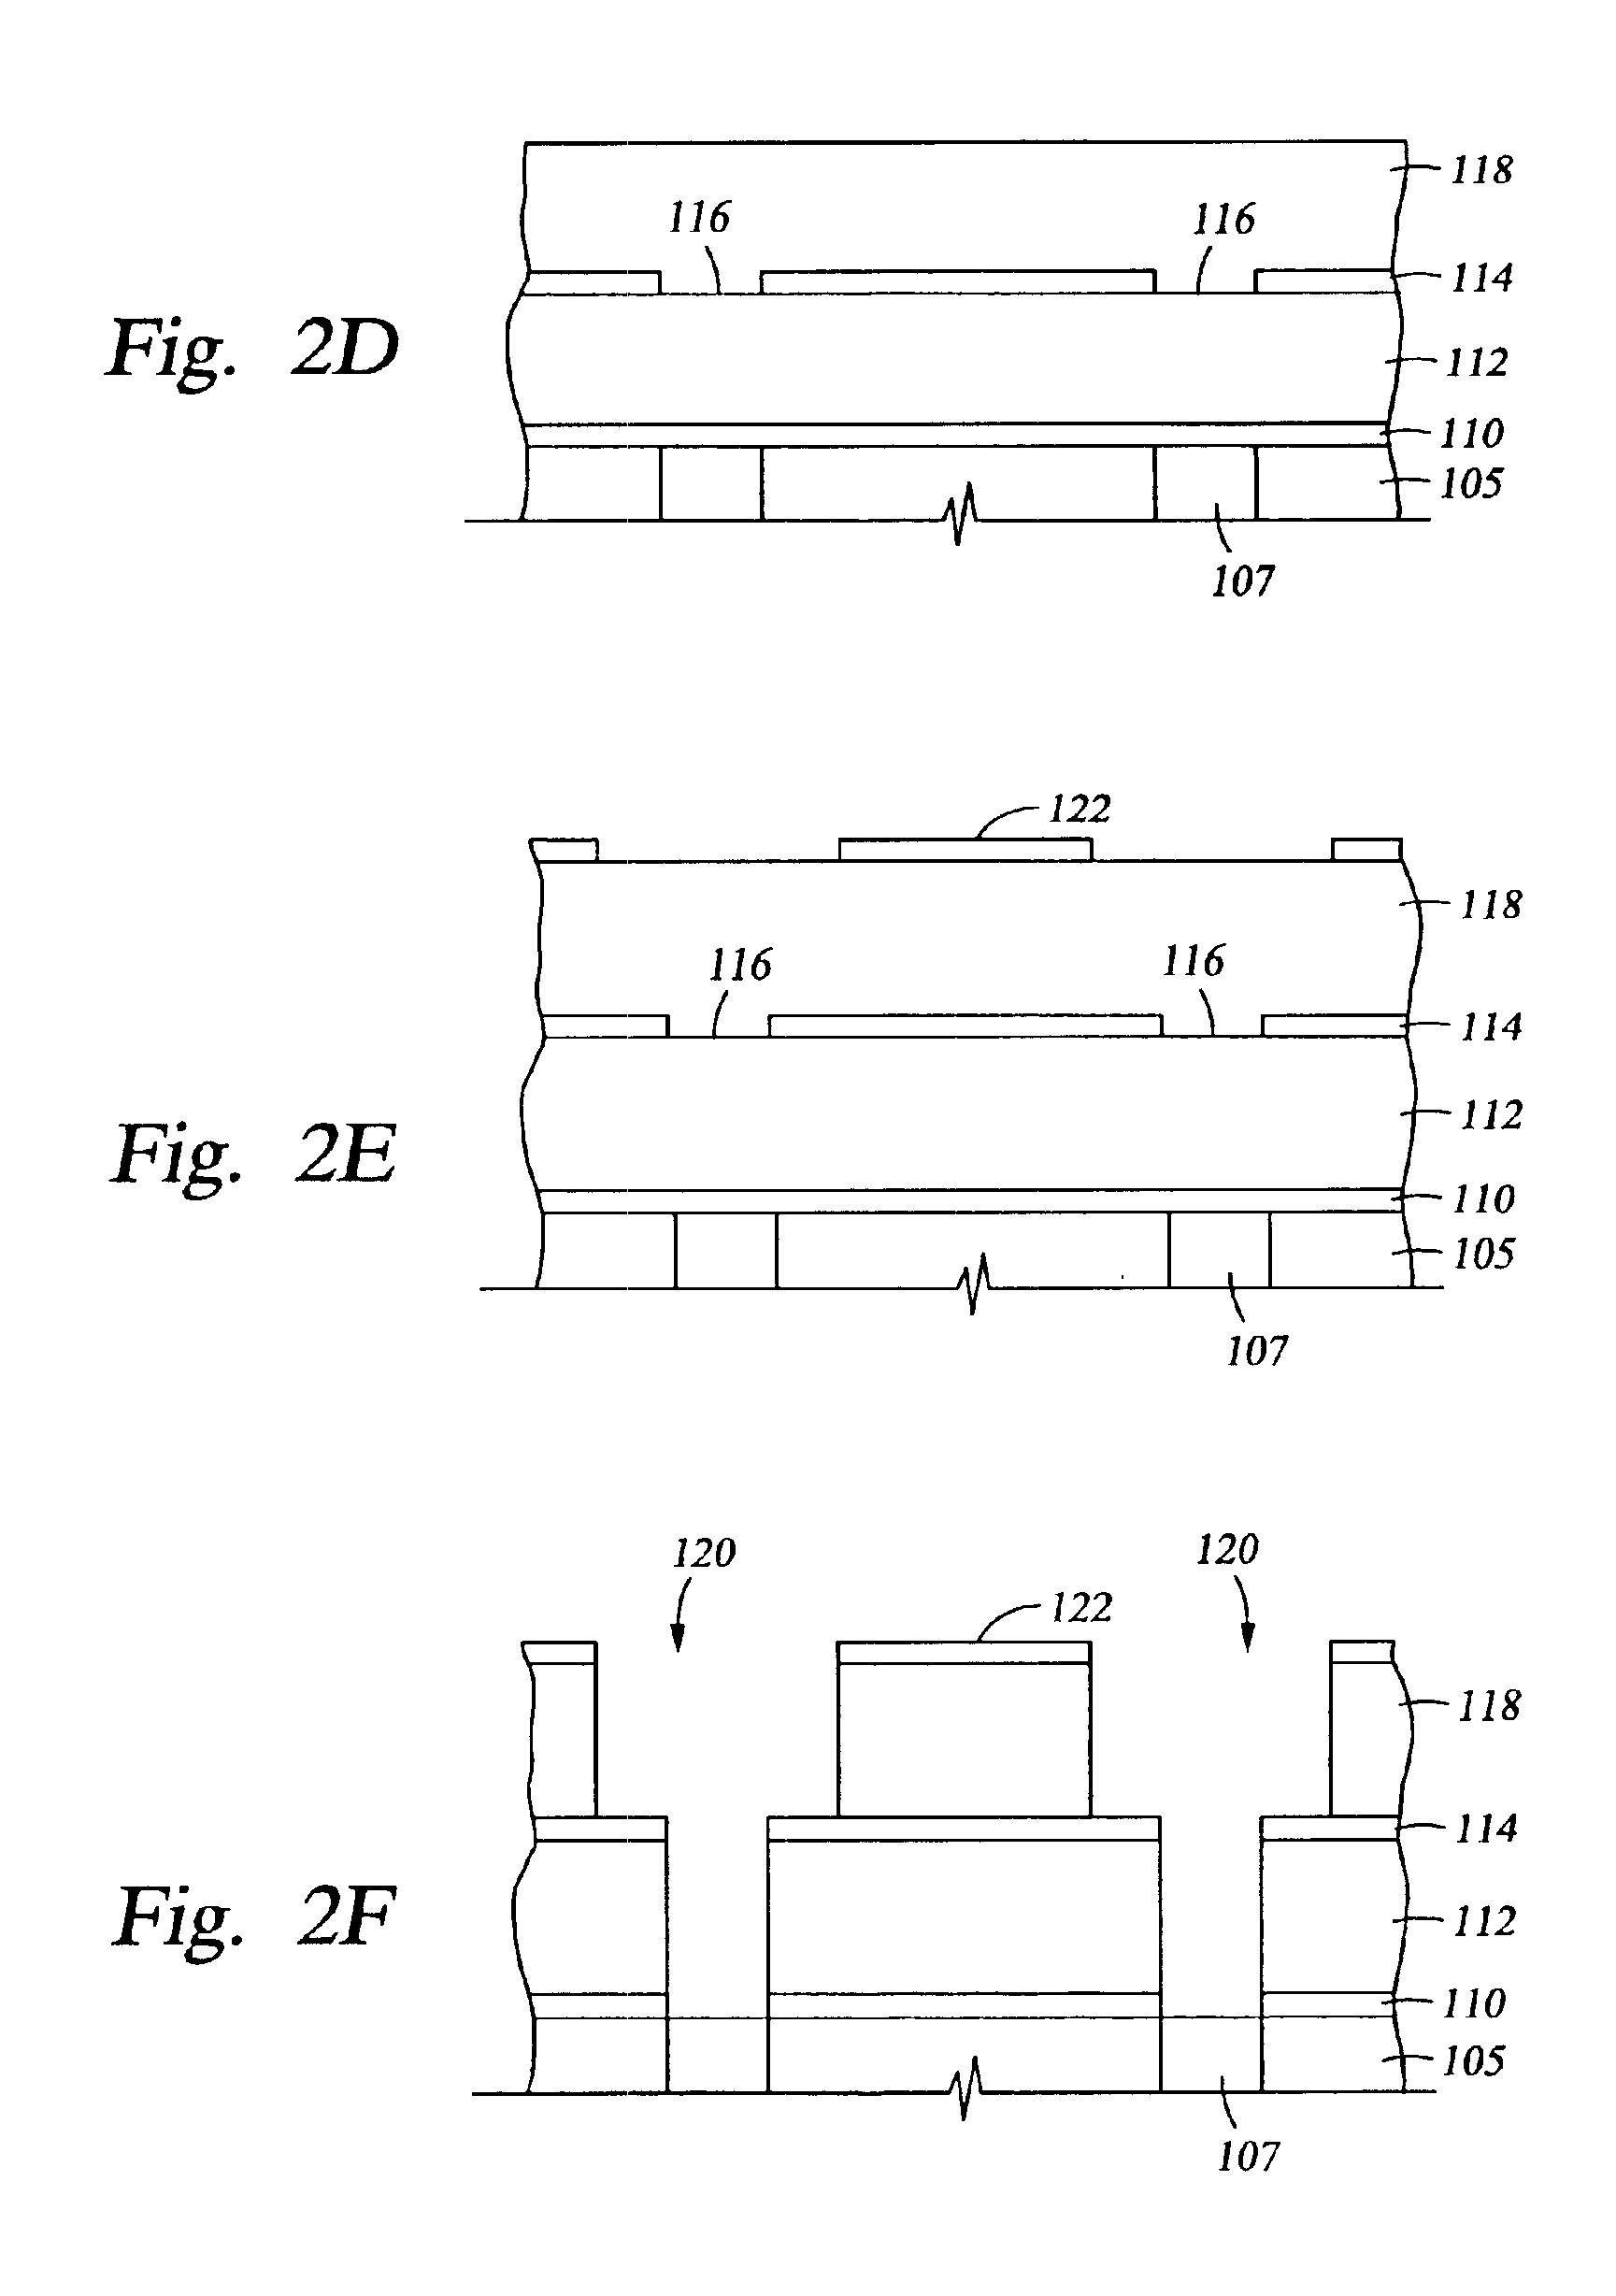 Method of depositing dielectric materials in damascene applications